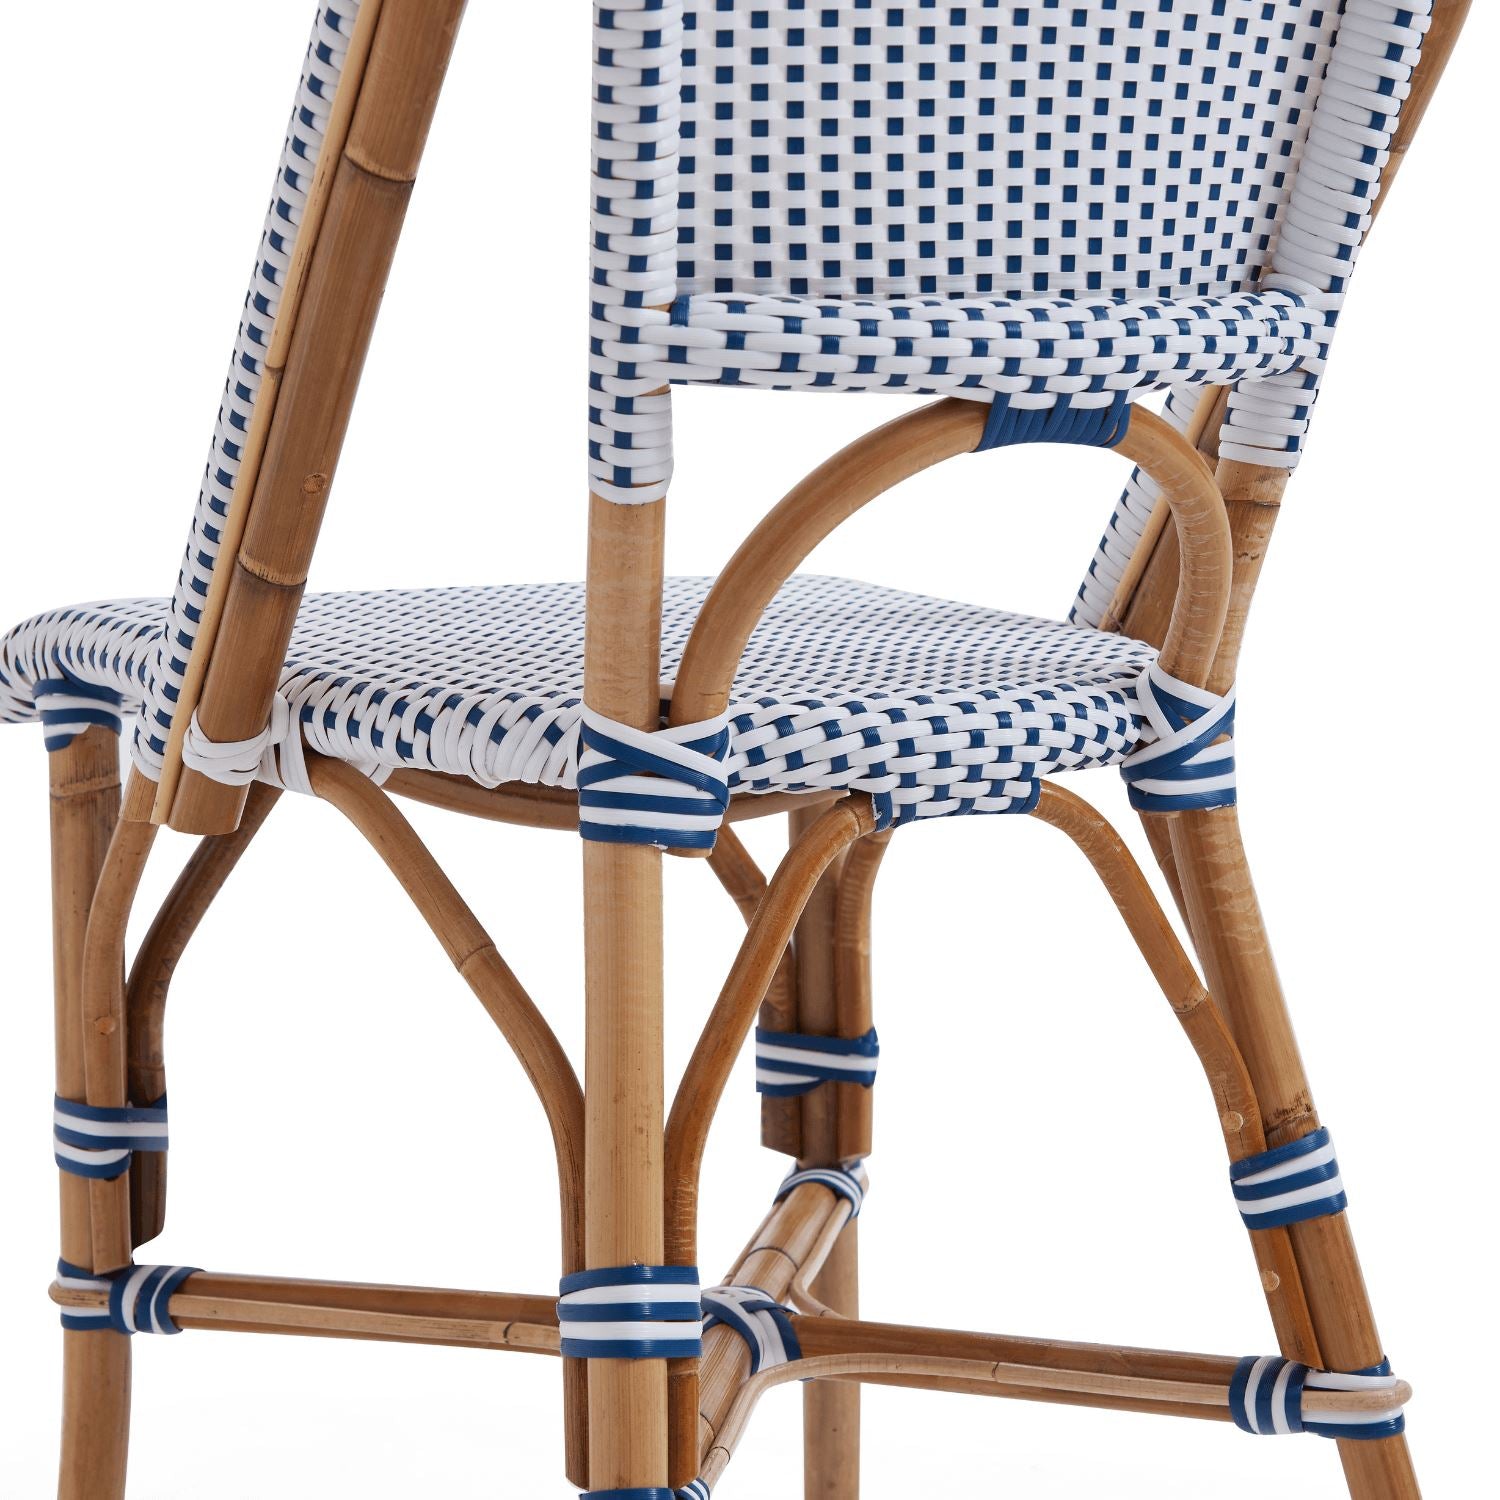 Lillyme Chair - Valyou 